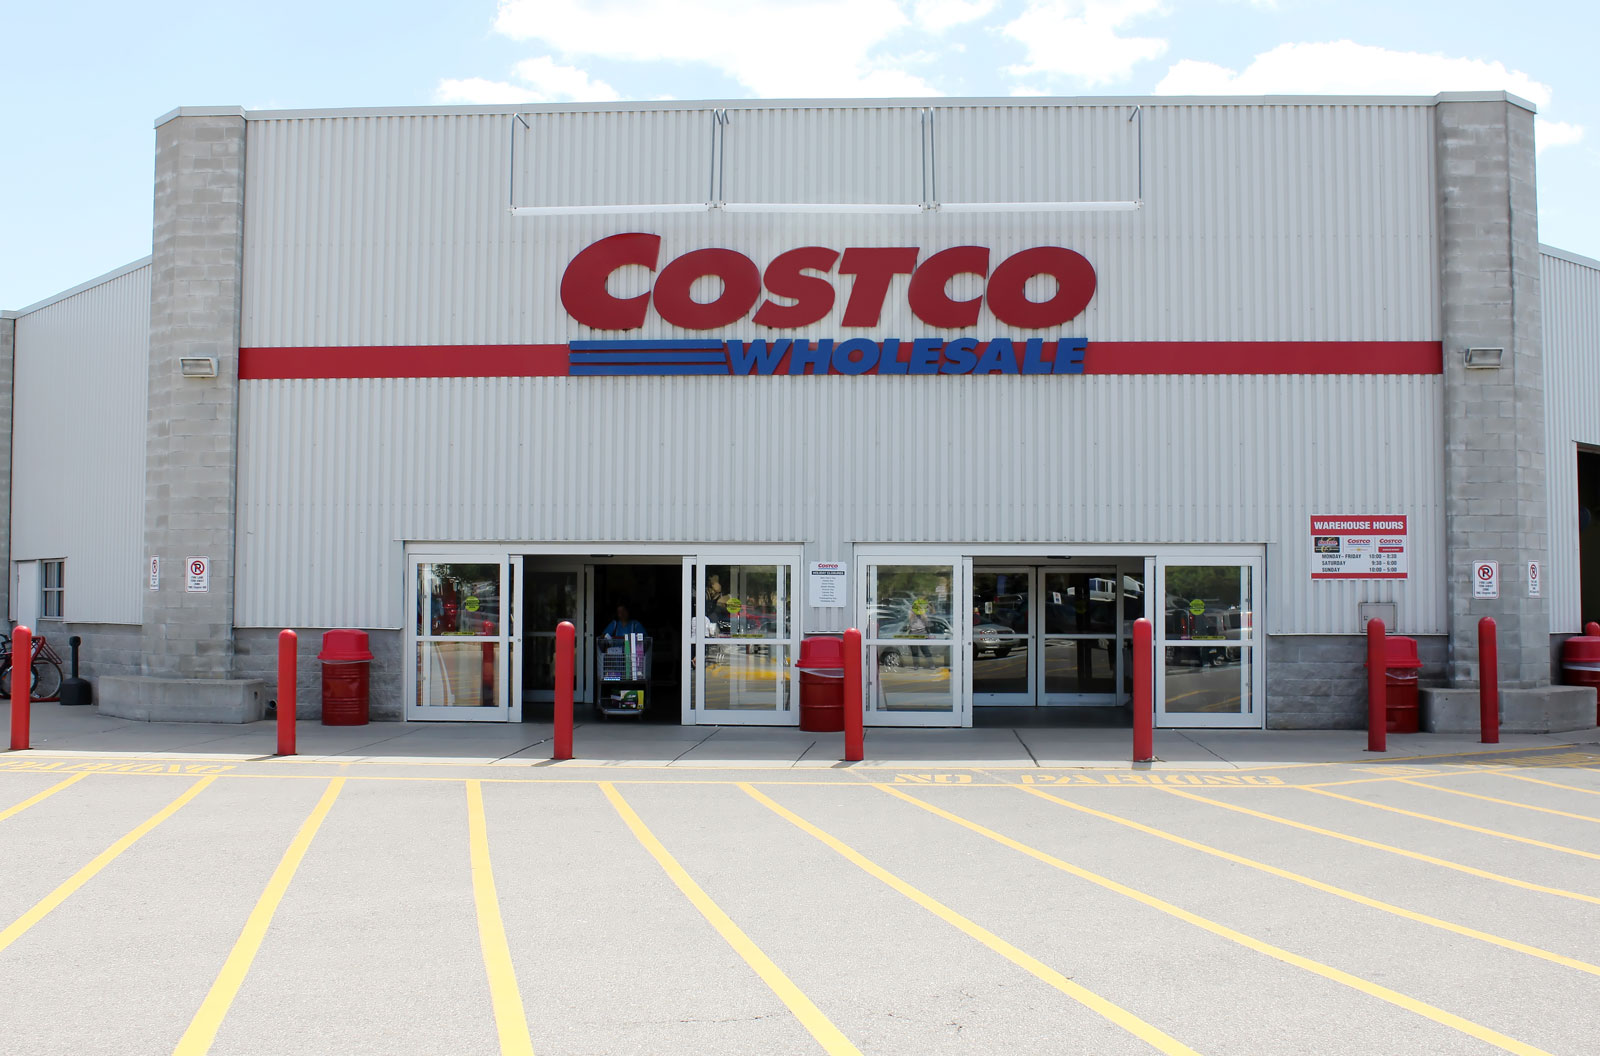 Costco List Of Items Under Limitations Here’s The Complete List!